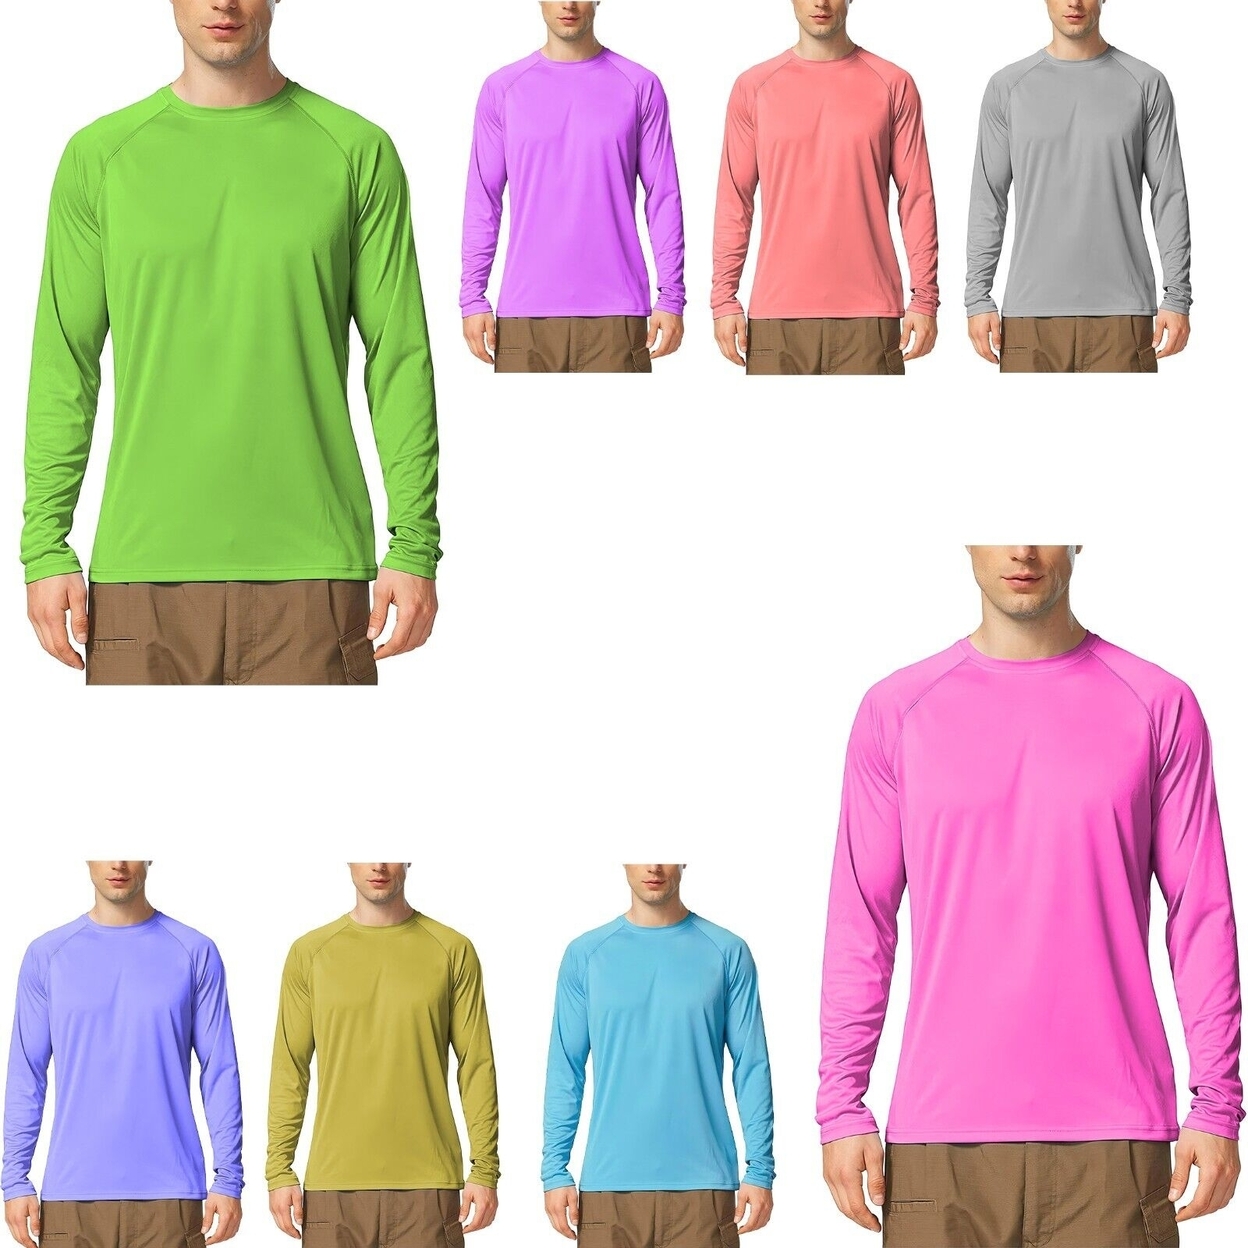 3-Pack: Men's Dri-Fit Moisture Wicking Athletic Cool Performance Slim Fit Long Sleeve T-Shirts - X-large